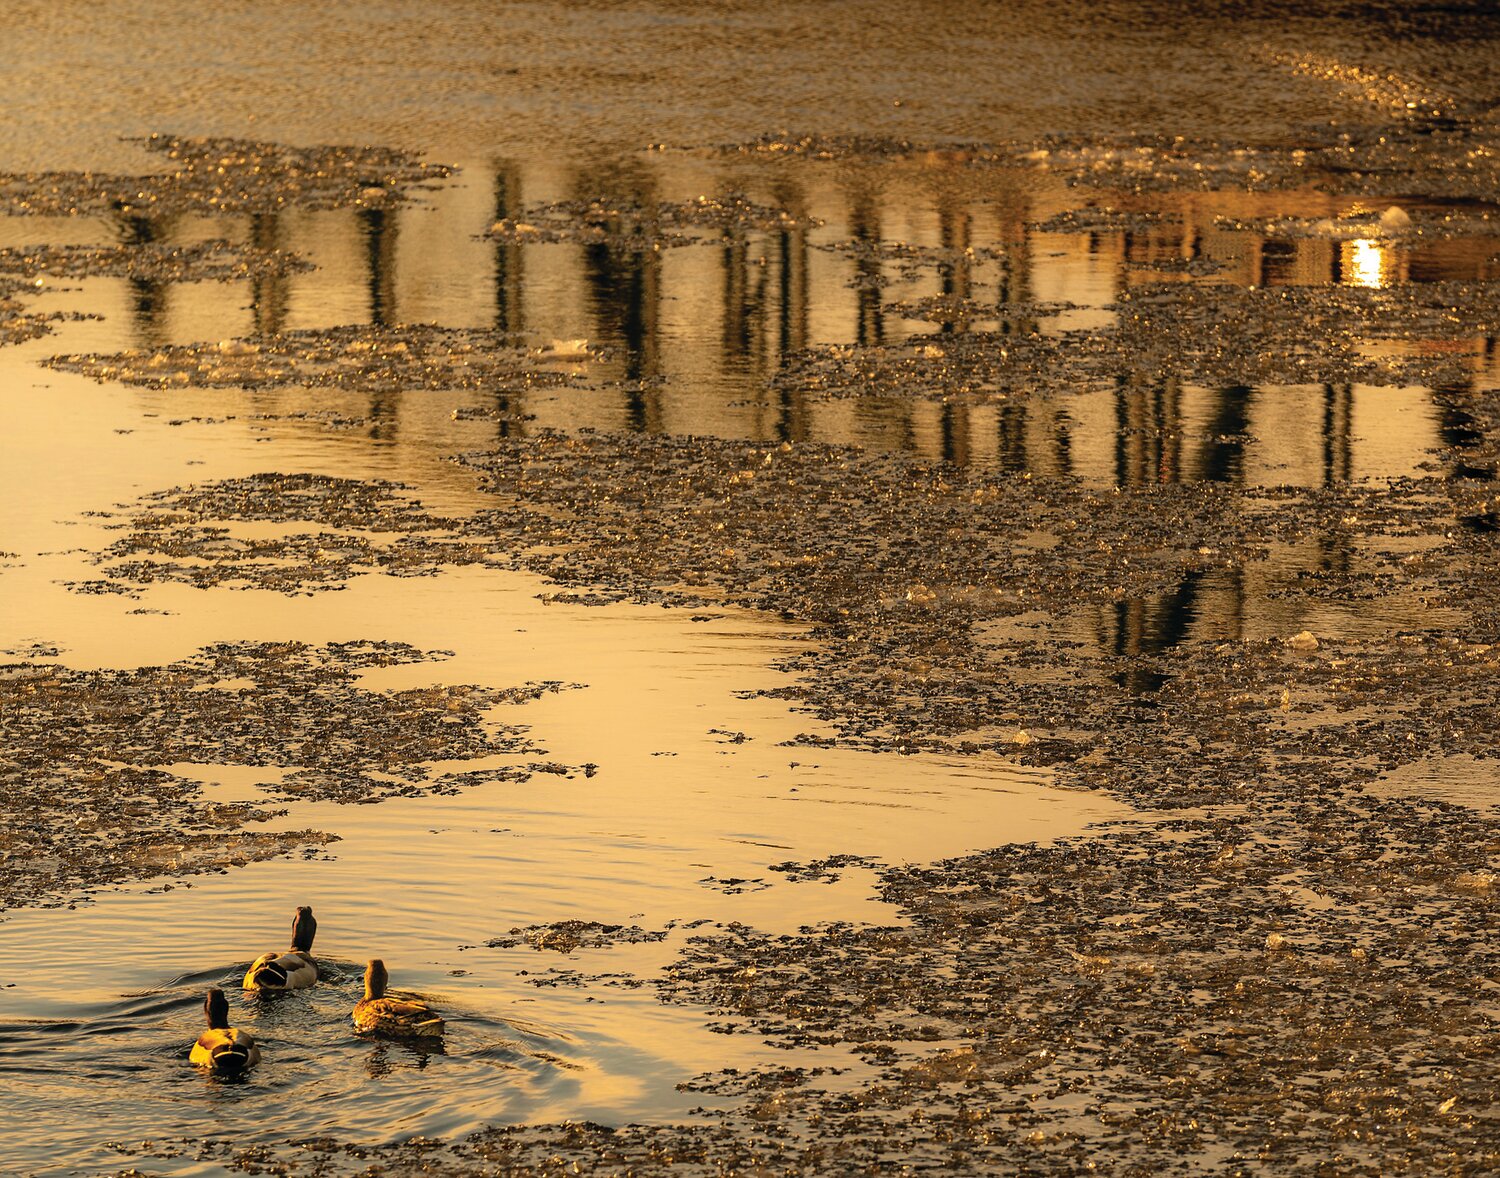 Ducks on the Golden River is by photographer Stephen Harris.